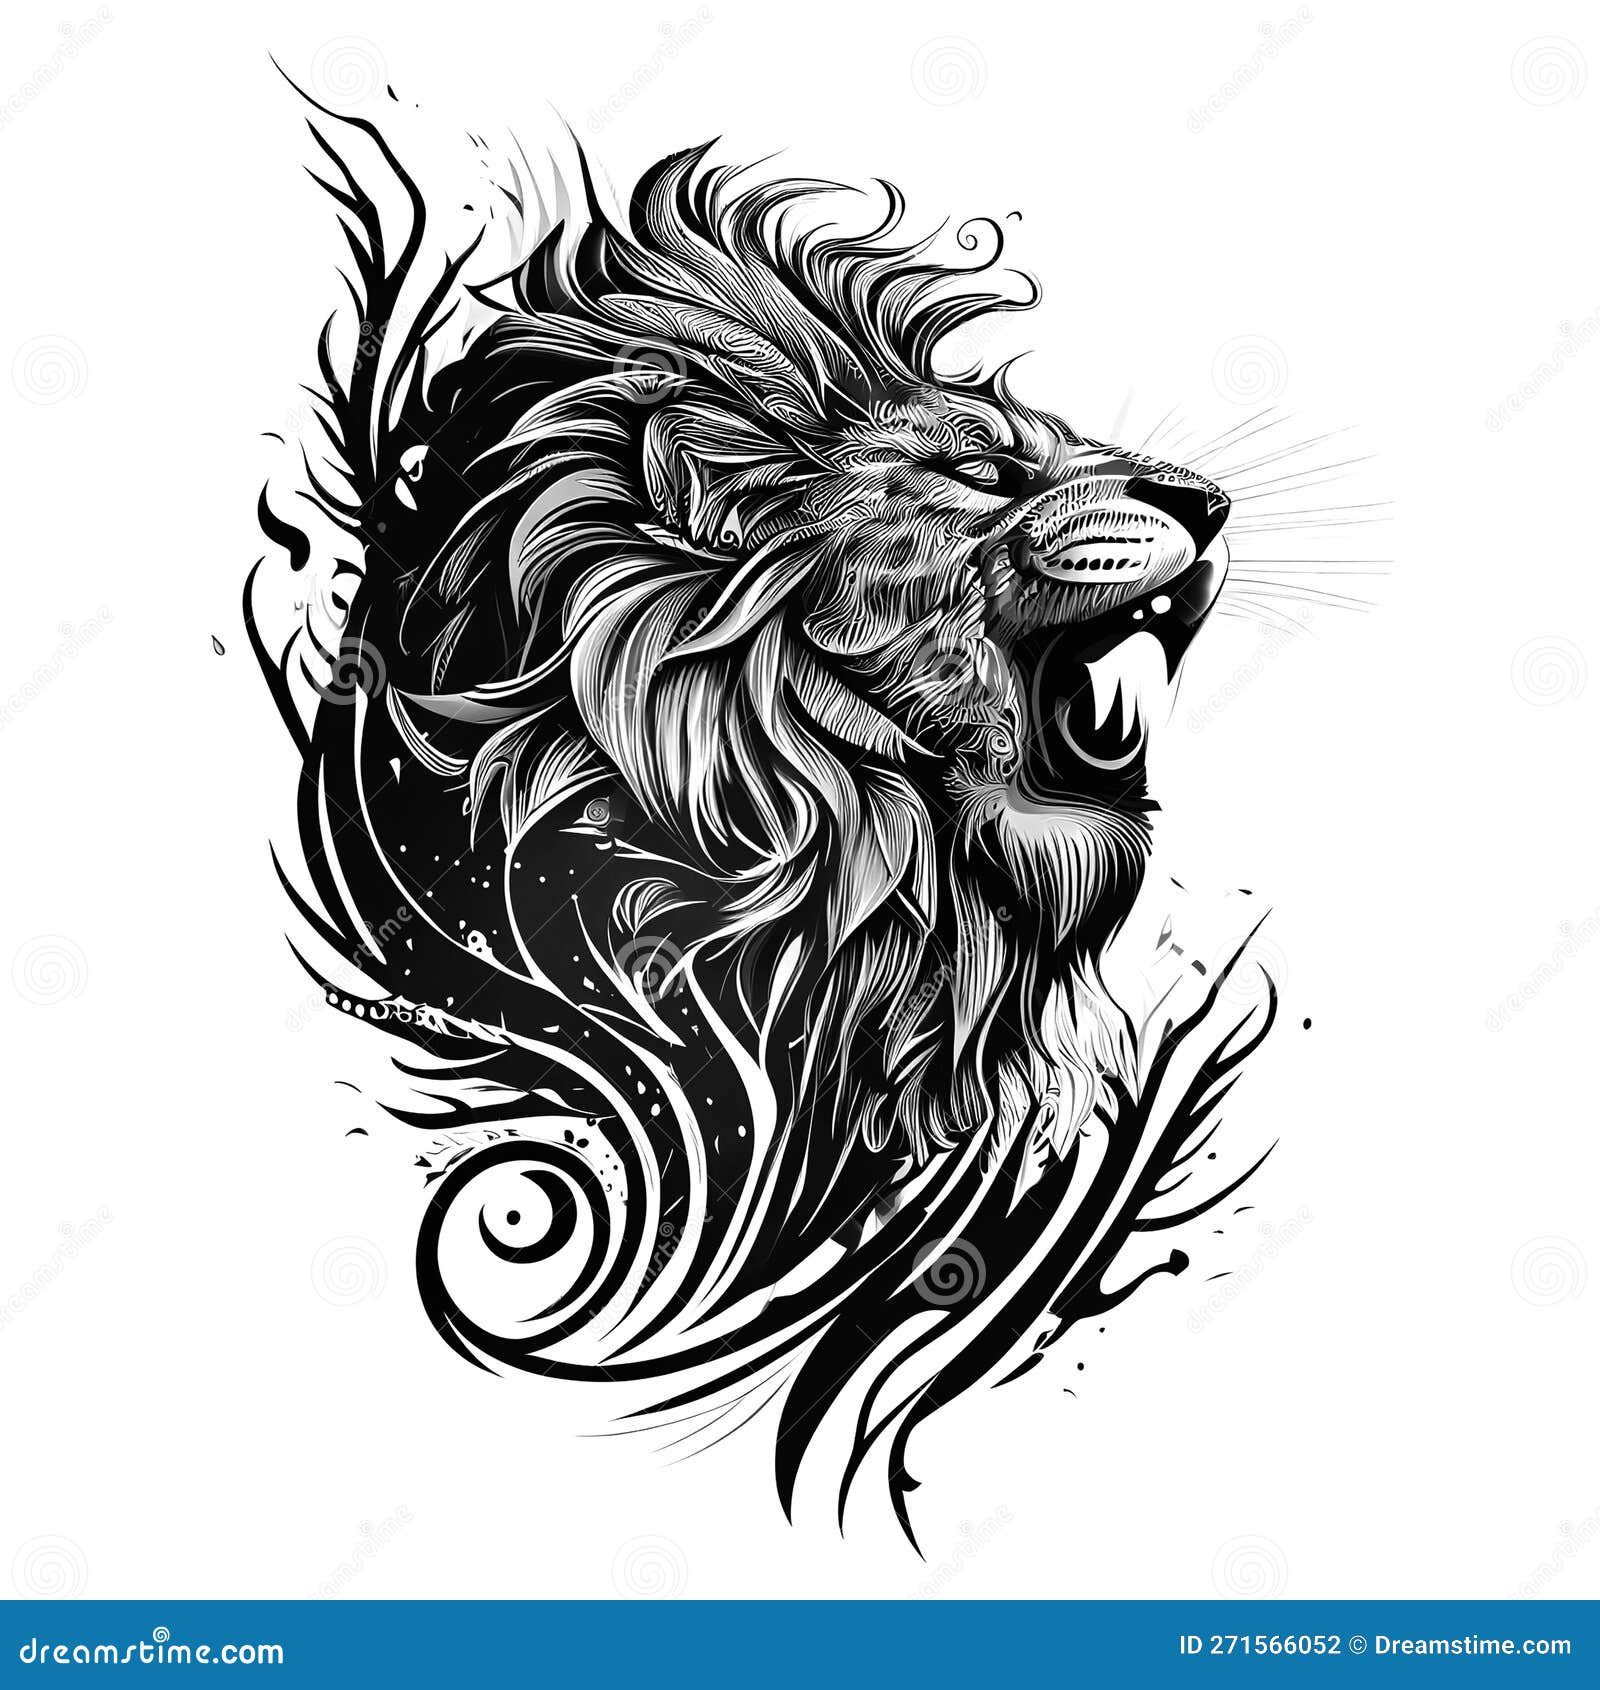 Tattoo fire lion Stock Photos and Images | agefotostock